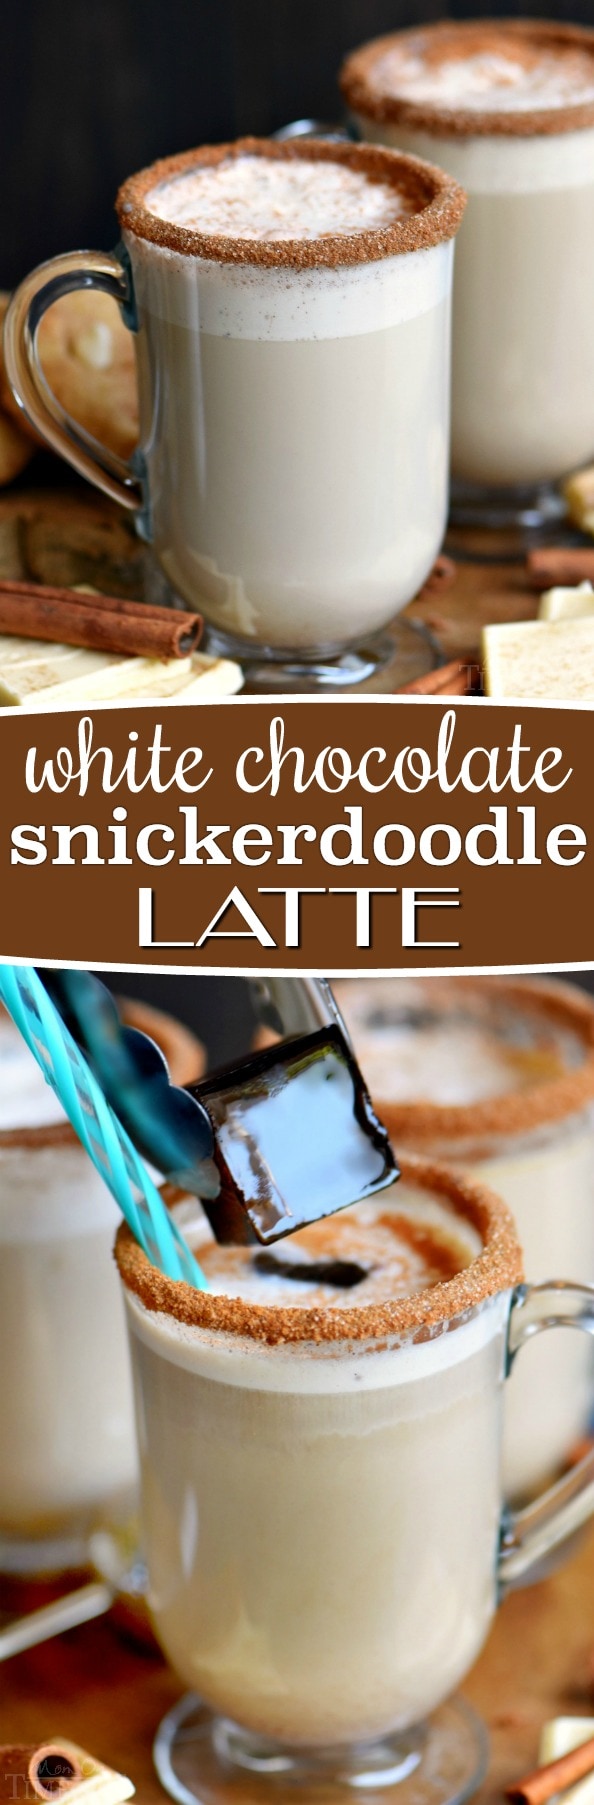 This White Chocolate Snickerdoodle Latte will delight your taste buds and all from the convenience of your own home! Making your own coffeehouse style latte has never been easier or more delicious! Make it hot or iced with my favorite iced coffee trick... // Mom On Timeout